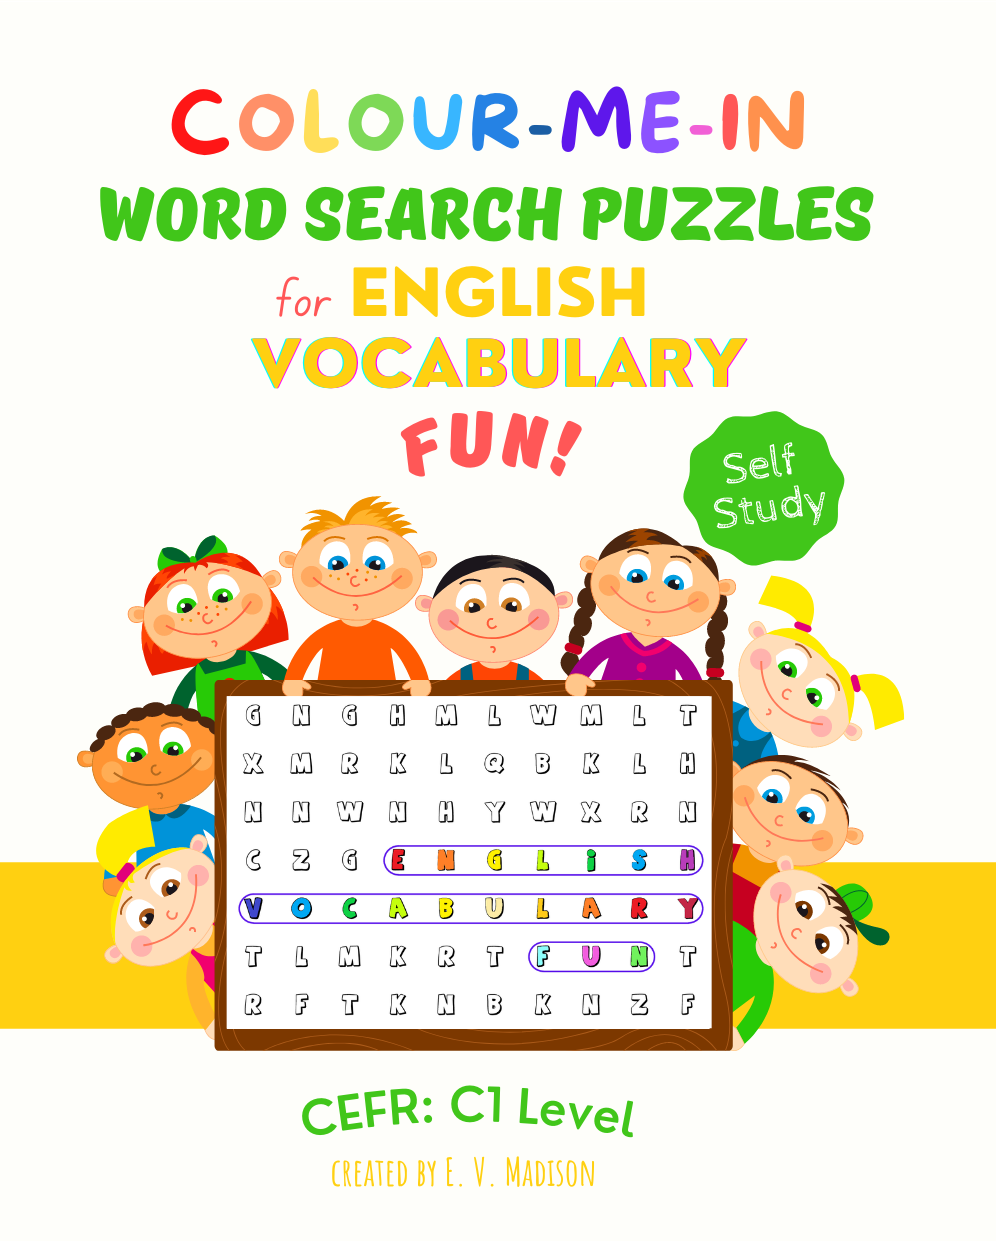 Colour-Me-In Word Search Puzzles for English Vocabulary Fun! C1 Level